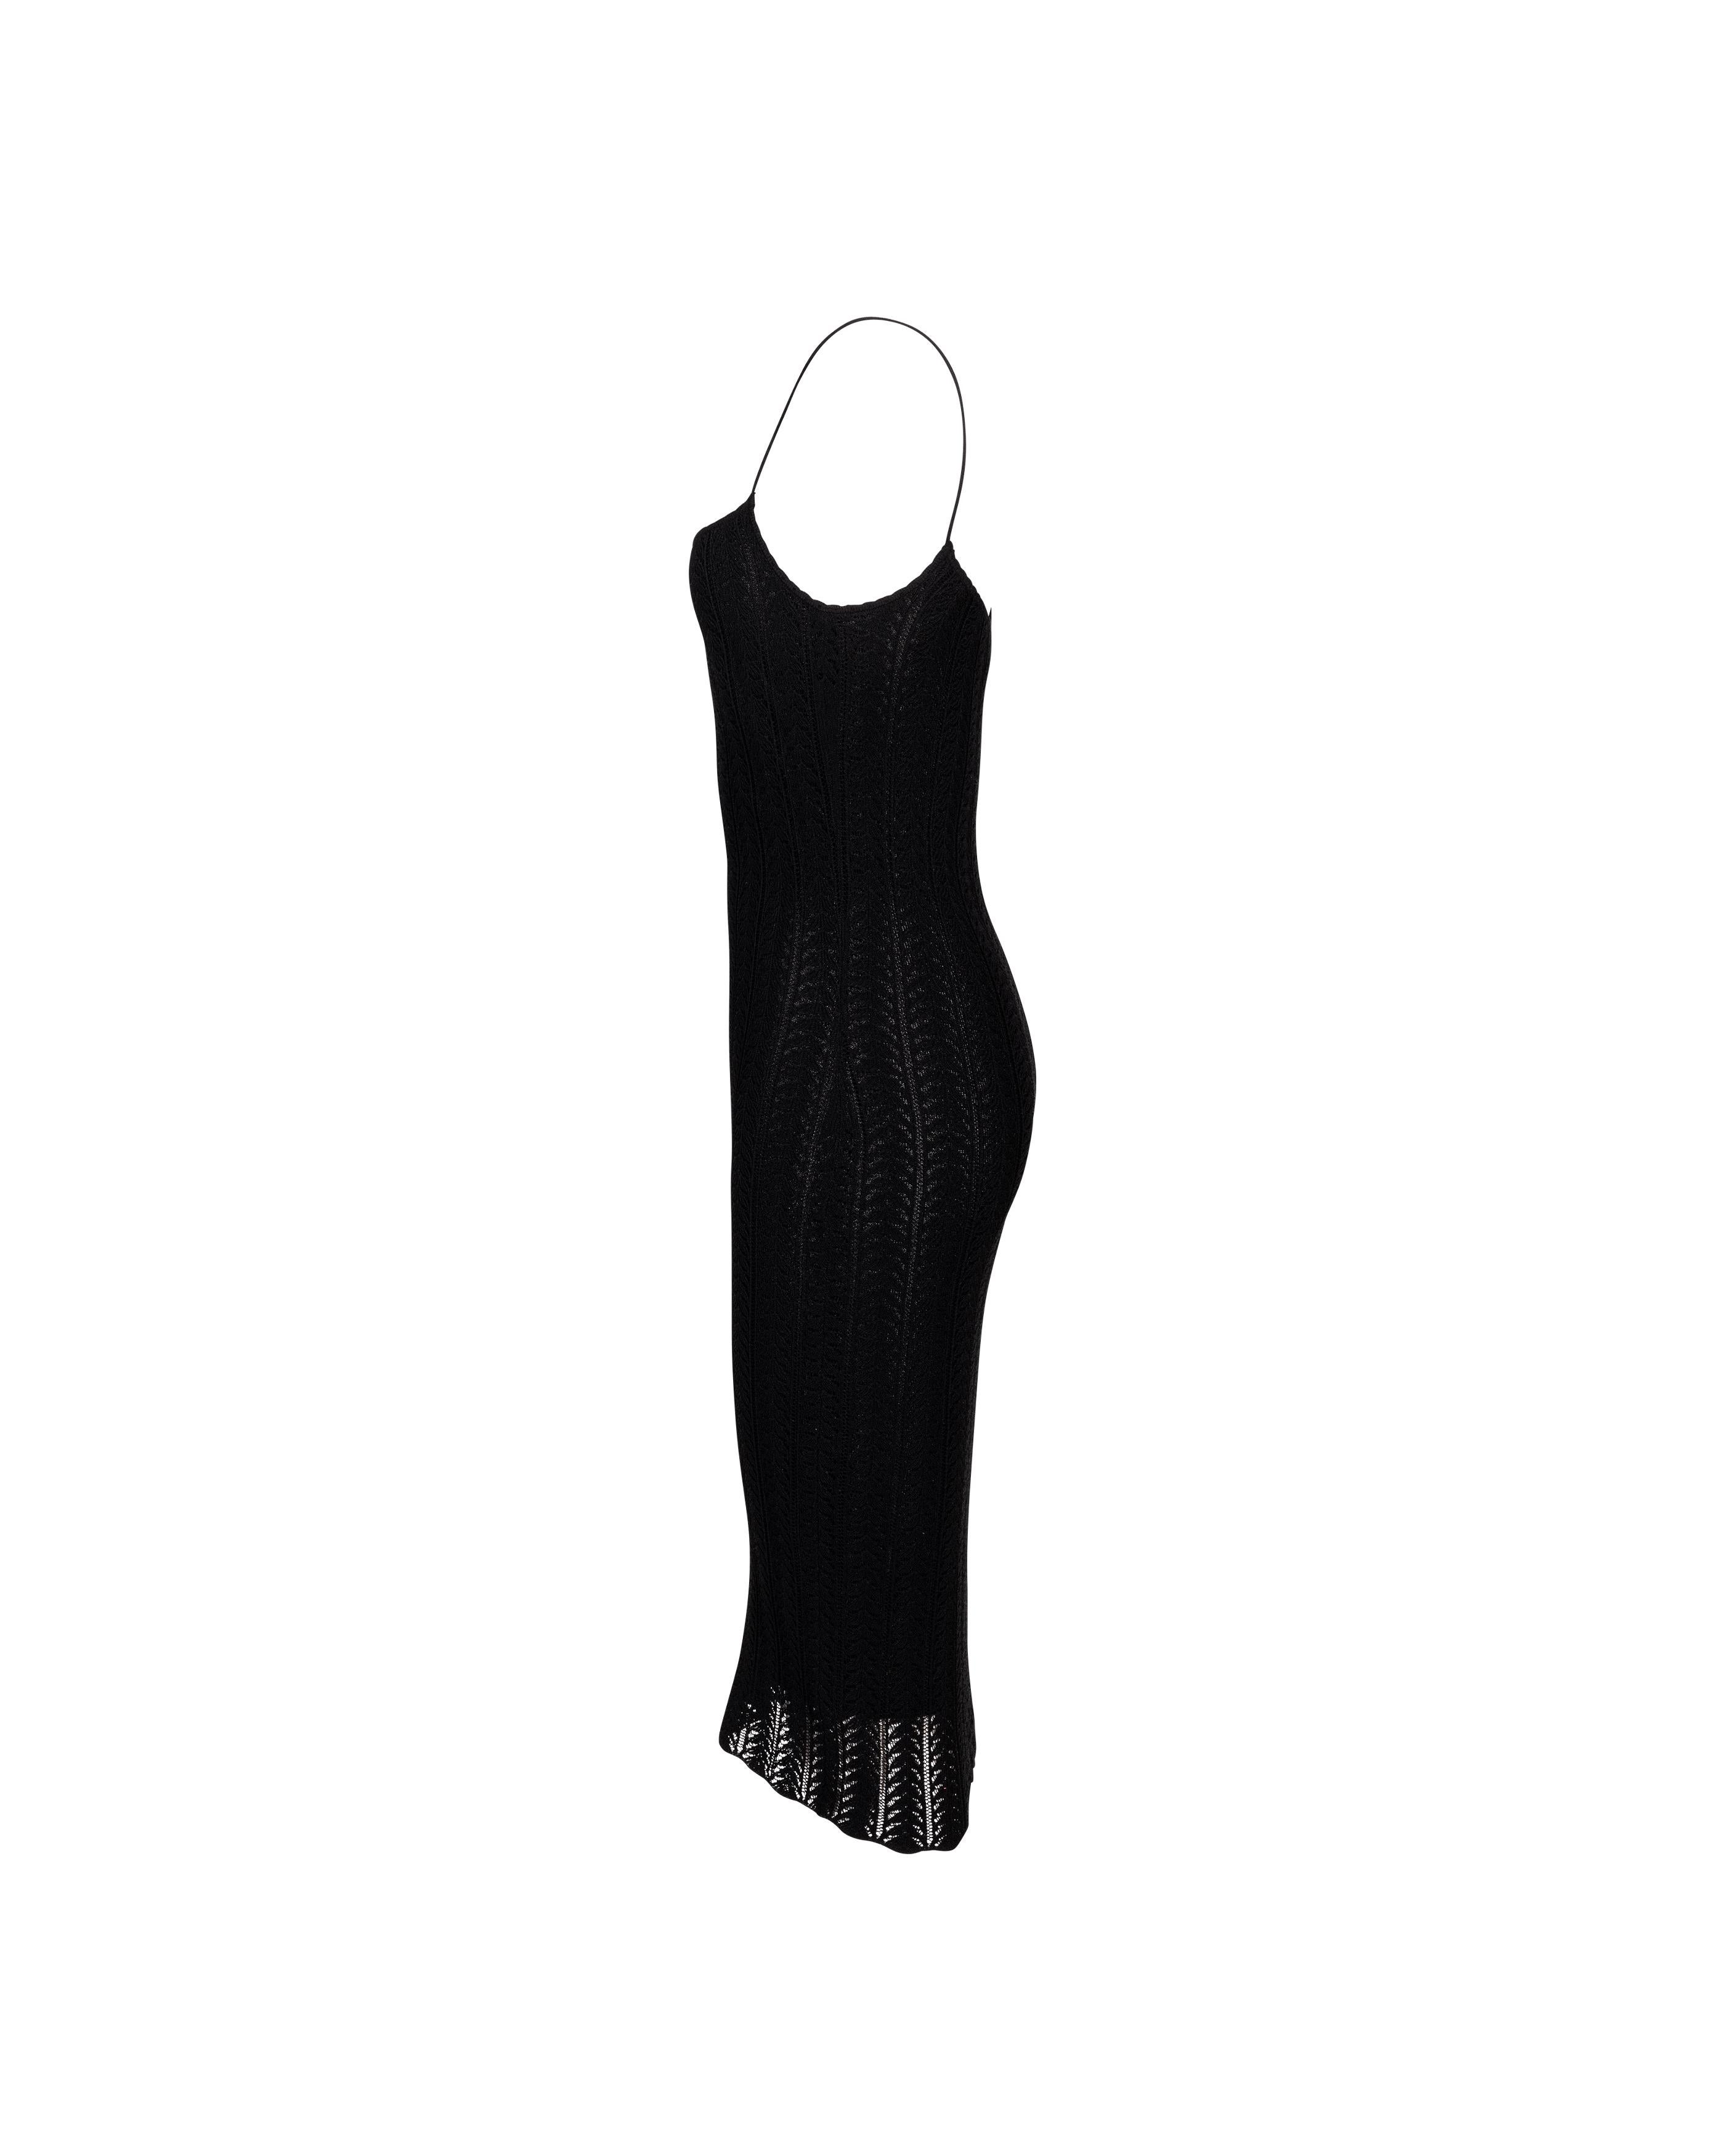 Resort 2000 John Galliano Black Openwork Knit Knee-Length Slip Dress In Excellent Condition For Sale In North Hollywood, CA